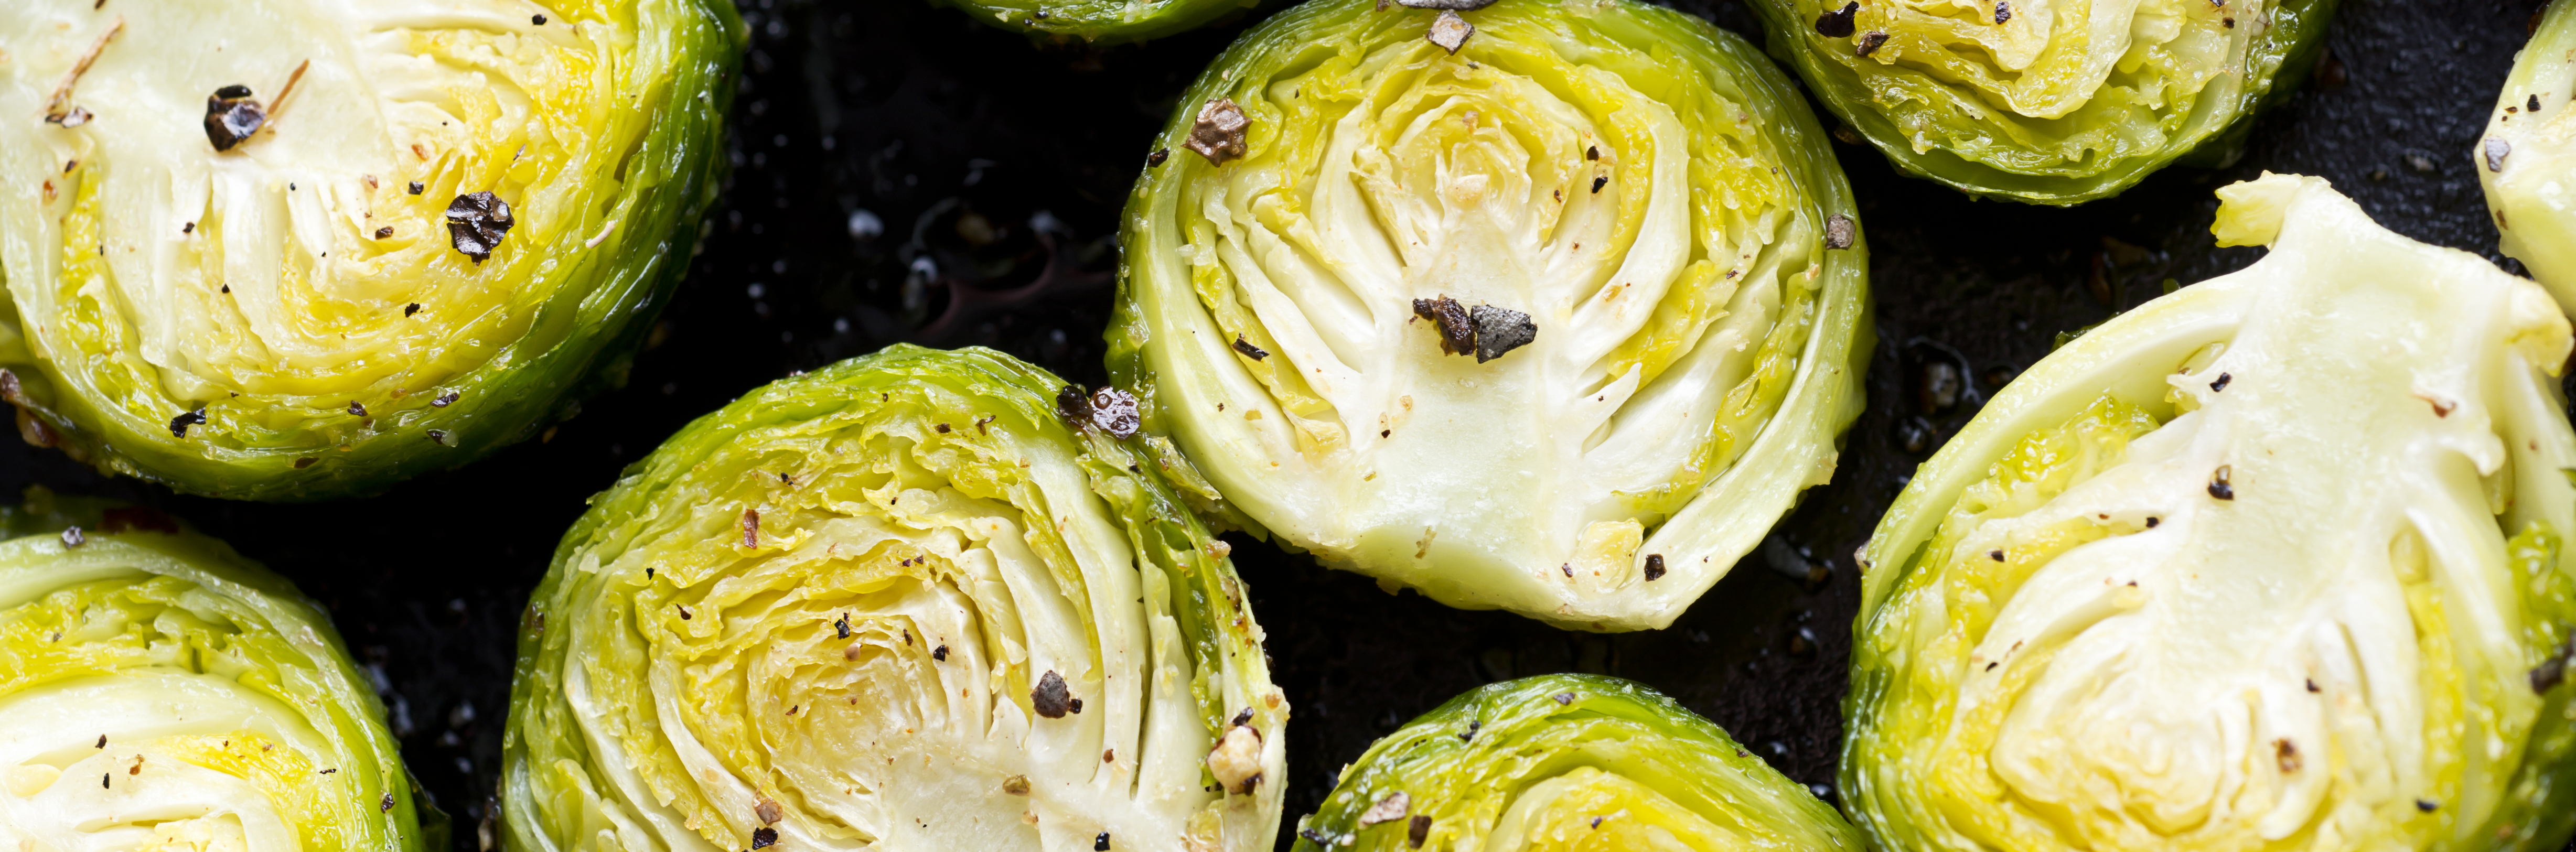 12267-6-HealthyHoliday-BrusselsSprouts-1242x411.jpg